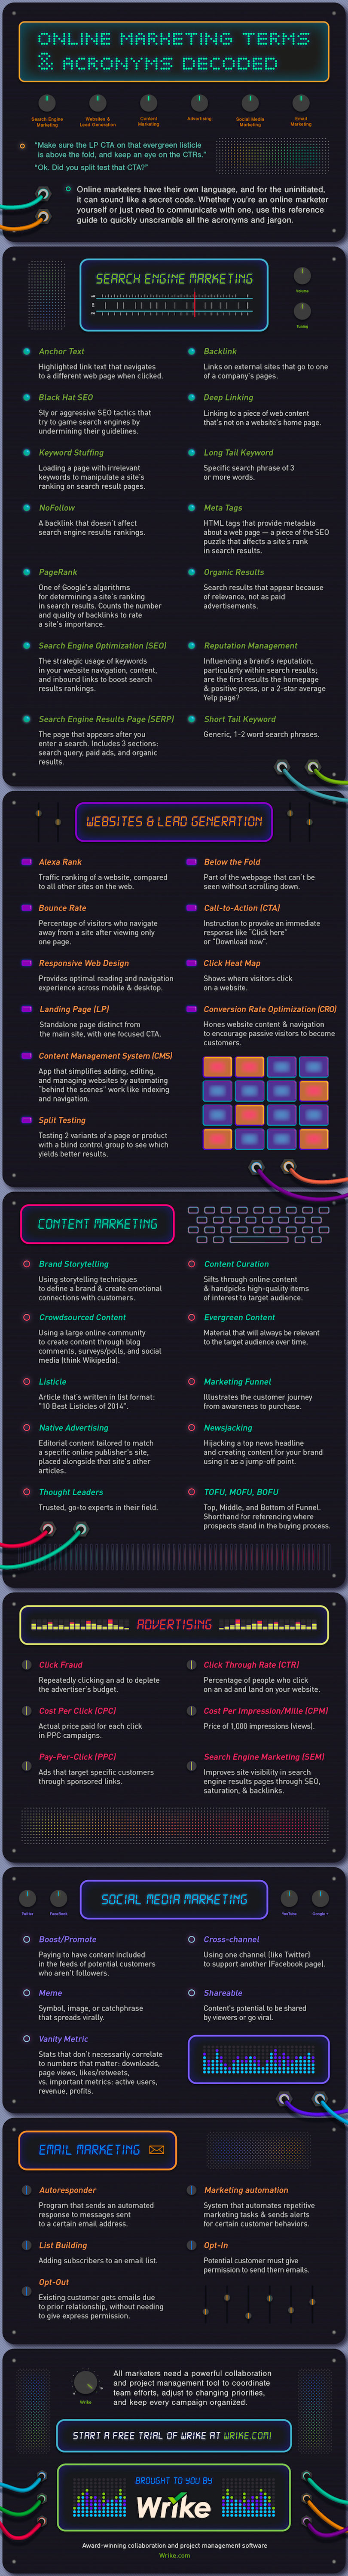 A-Z Glossary of Online Marketing Terms - infographic by Wrike